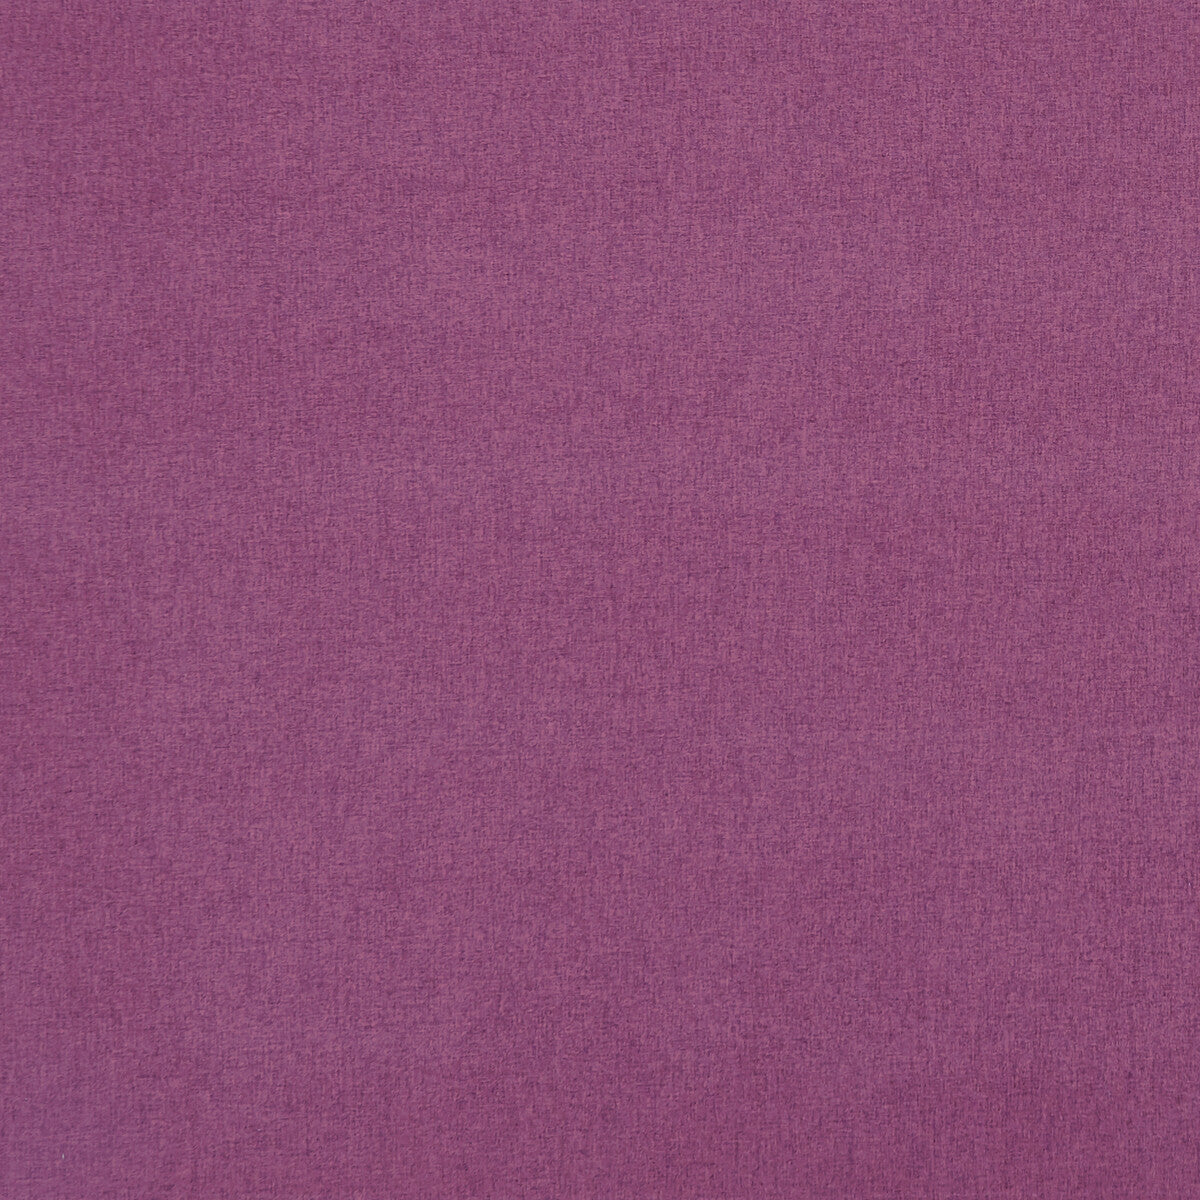 Highlander fabric in cranberry color - pattern F0848/38.CAC.0 - by Clarke And Clarke in the Clarke &amp; Clarke Highlander 2 collection